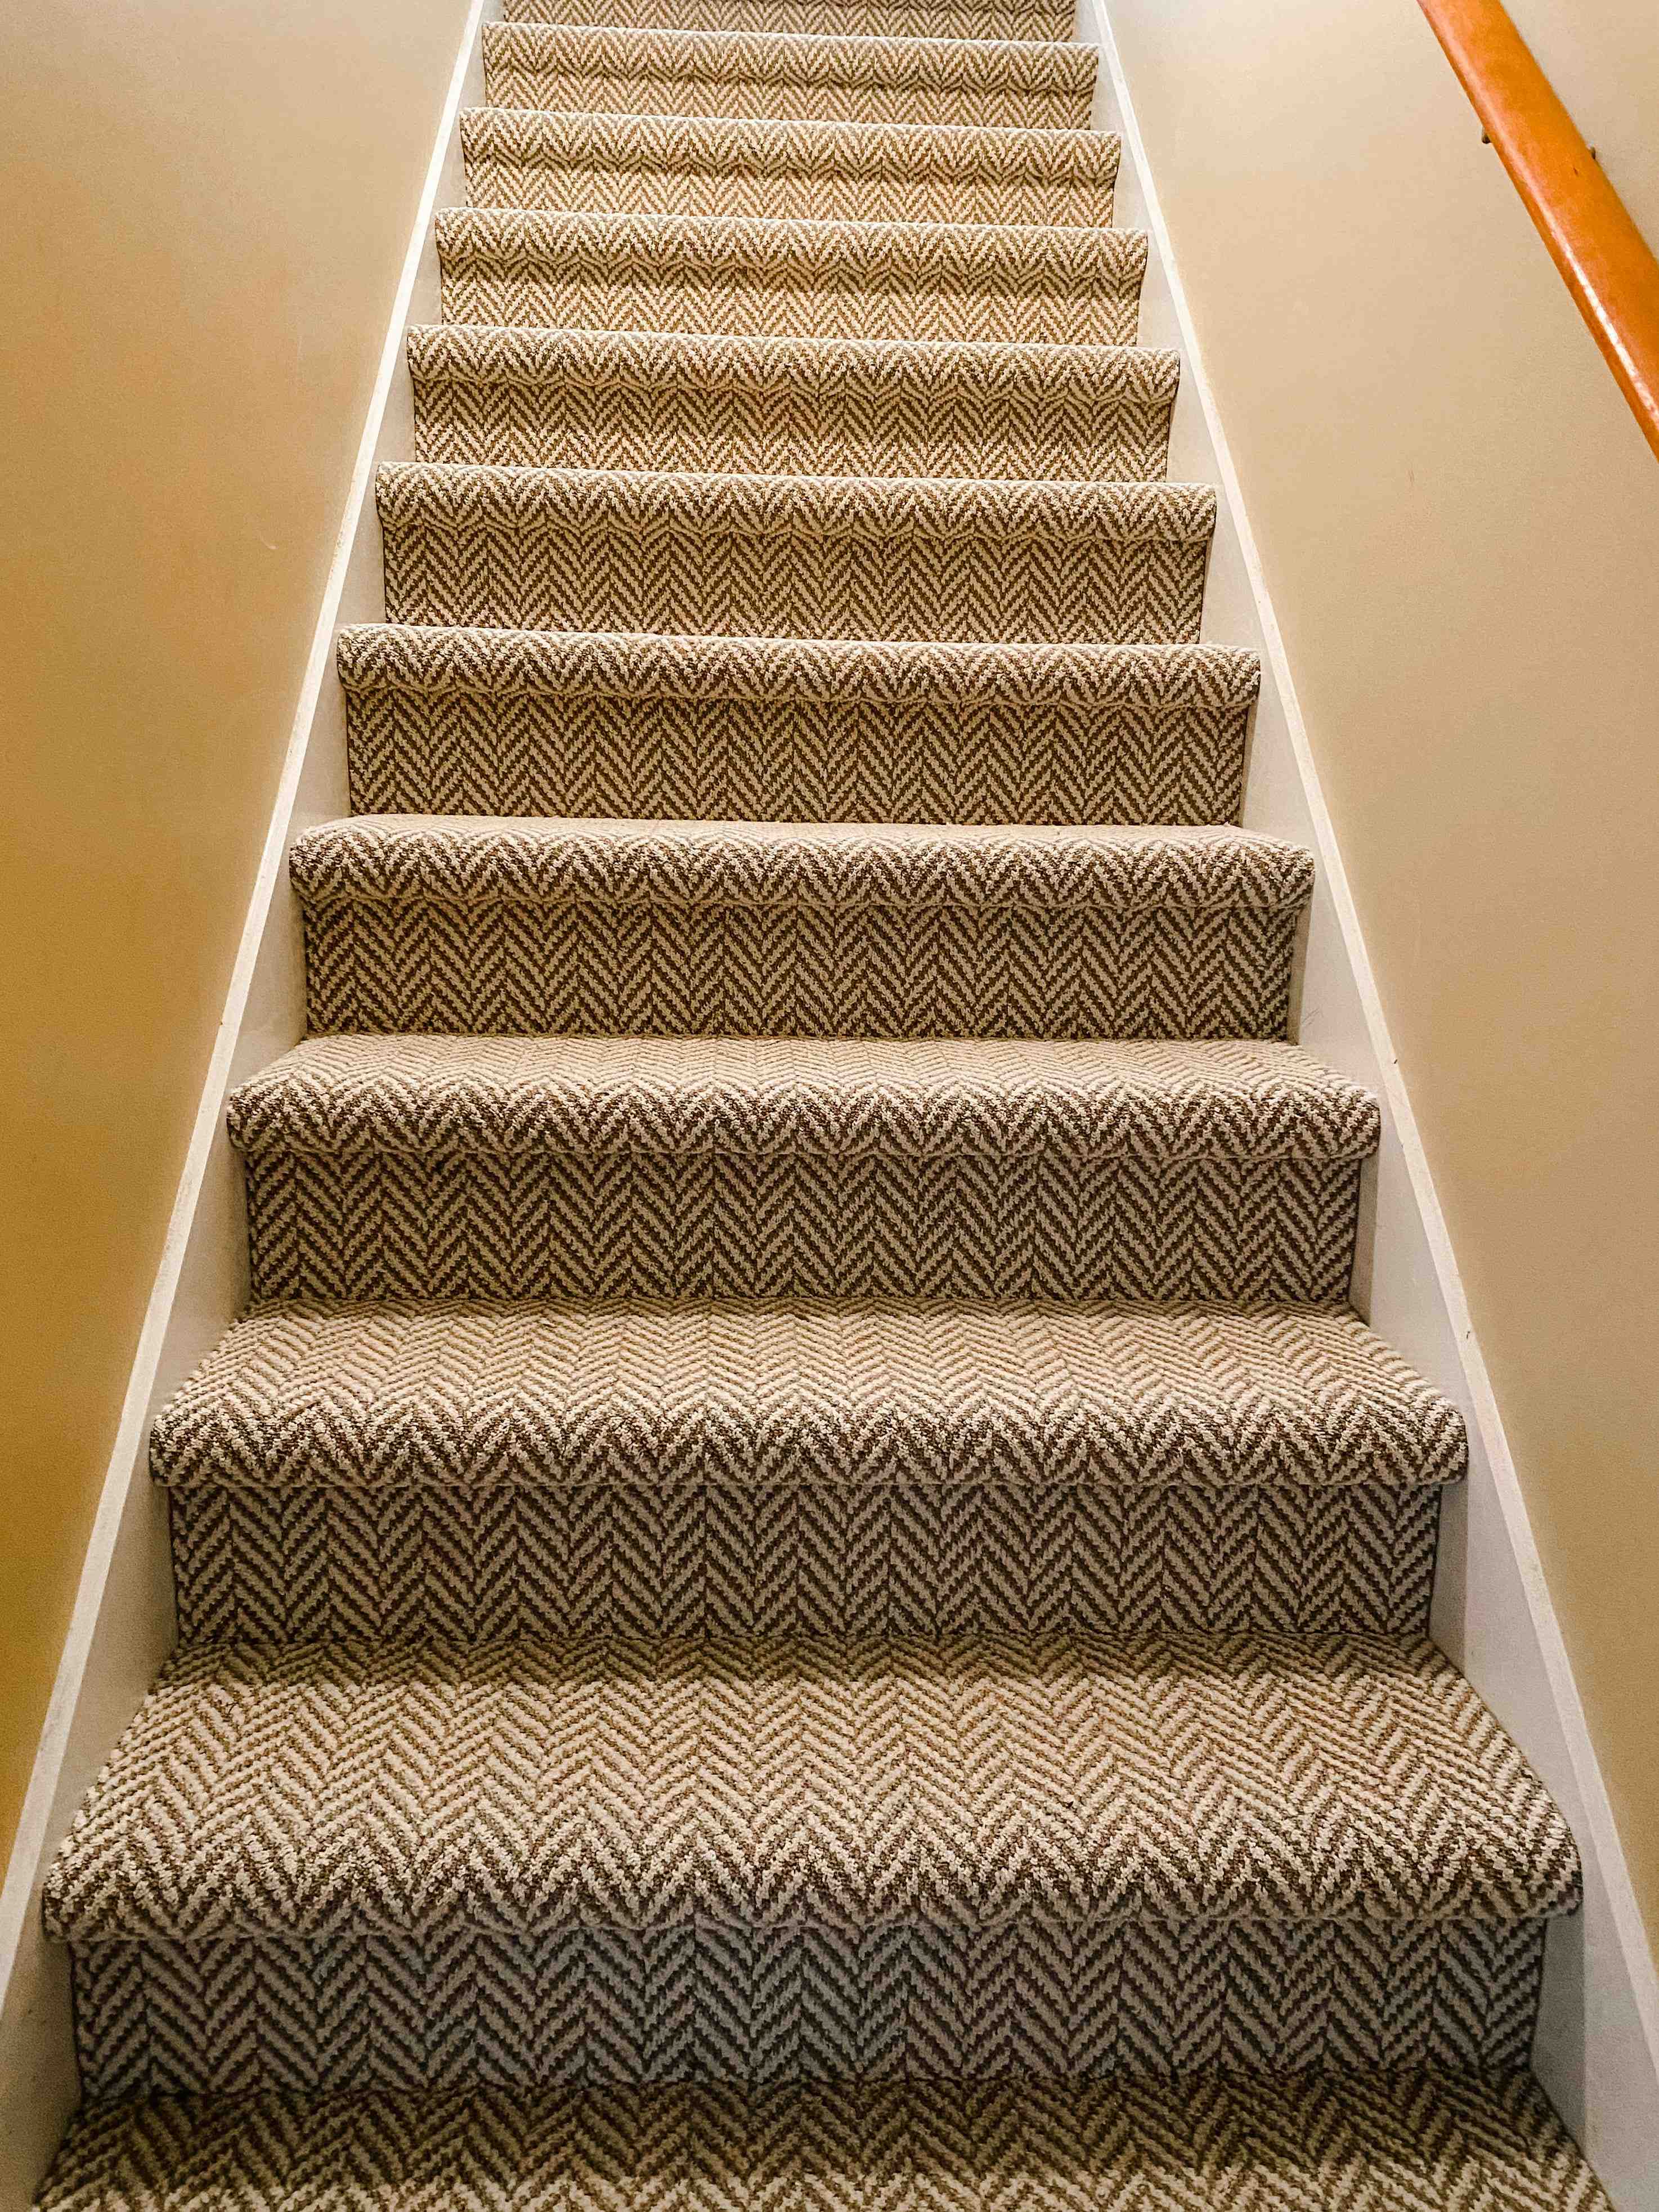 Stair Runners | Henson's Greater Tennessee Flooring